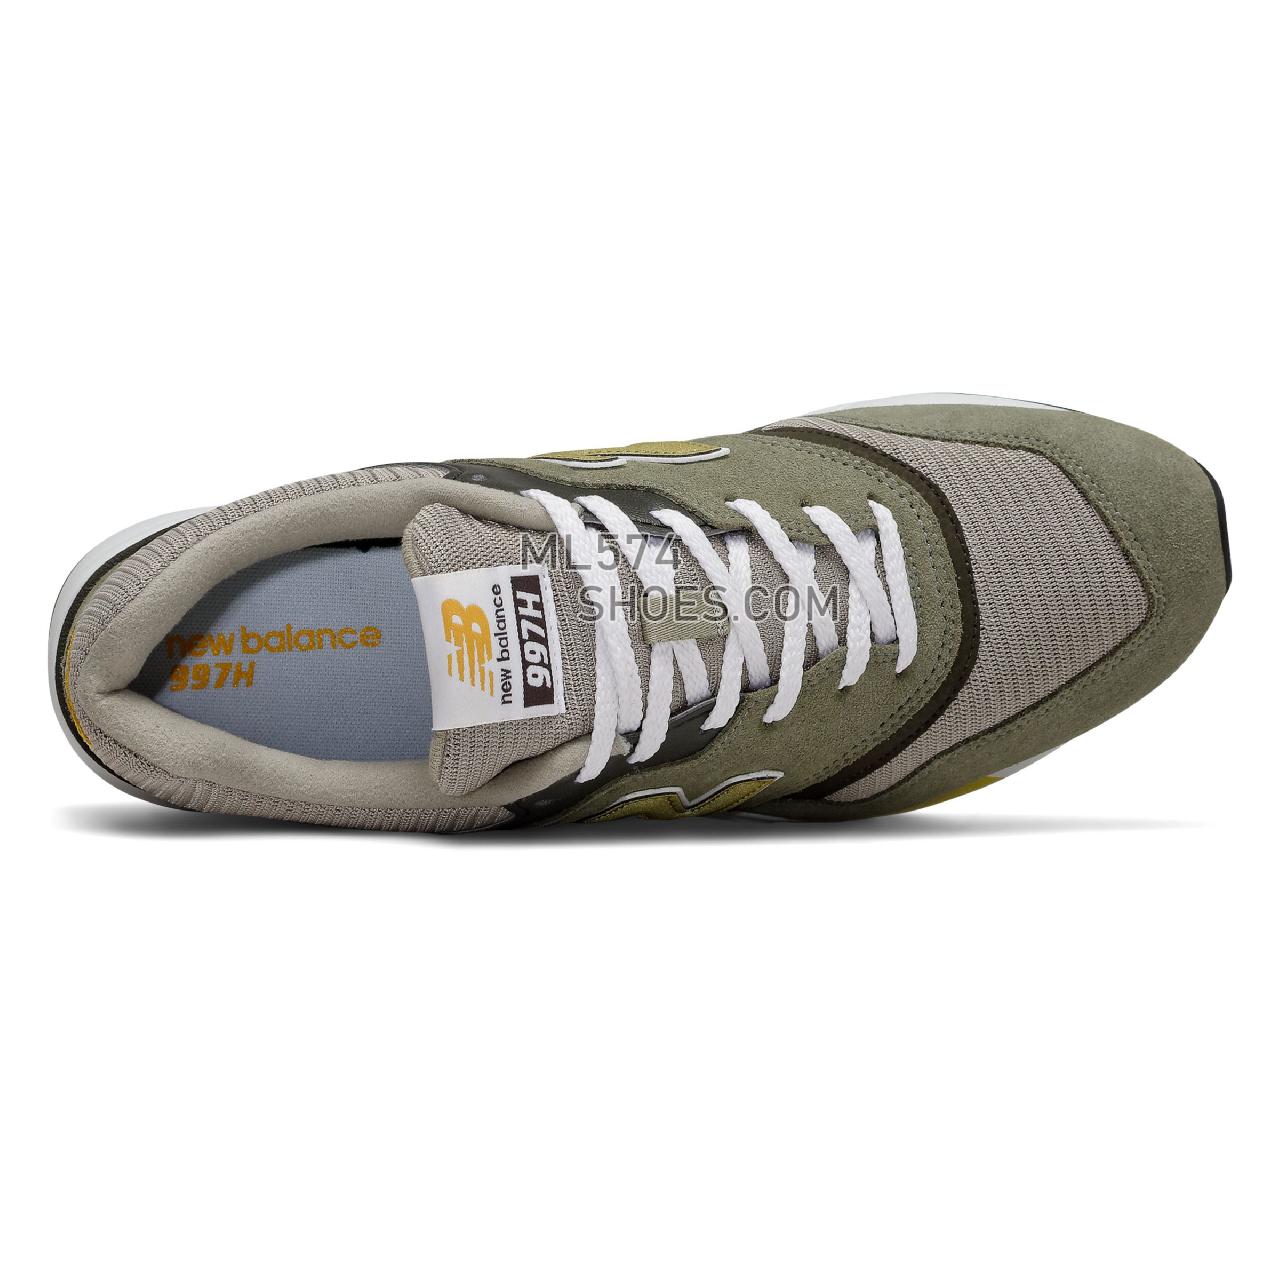 New Balance 997H - Men's 997H Classic - Covert Green with Varsity Gold - CM997HEZ